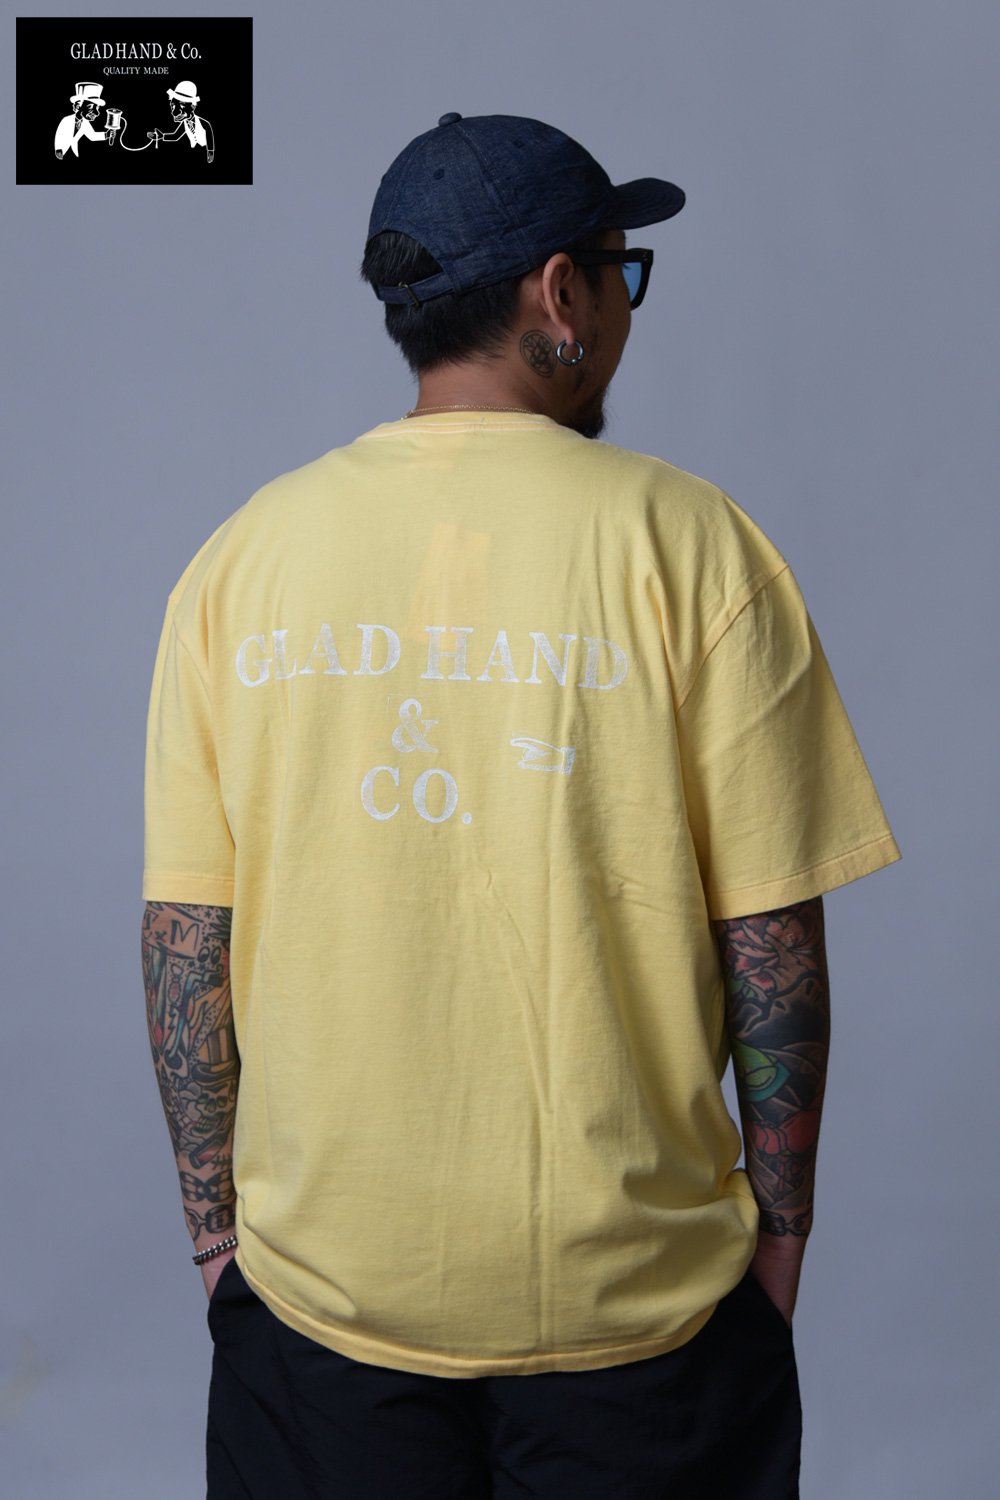 GLADHAND(グラッドハンド) Tシャツ GLADHAND&Co. STAMP T-SHIRTS GH-23-MS-01 通販正規取扱 |  ハーレムストア公式通販サイト